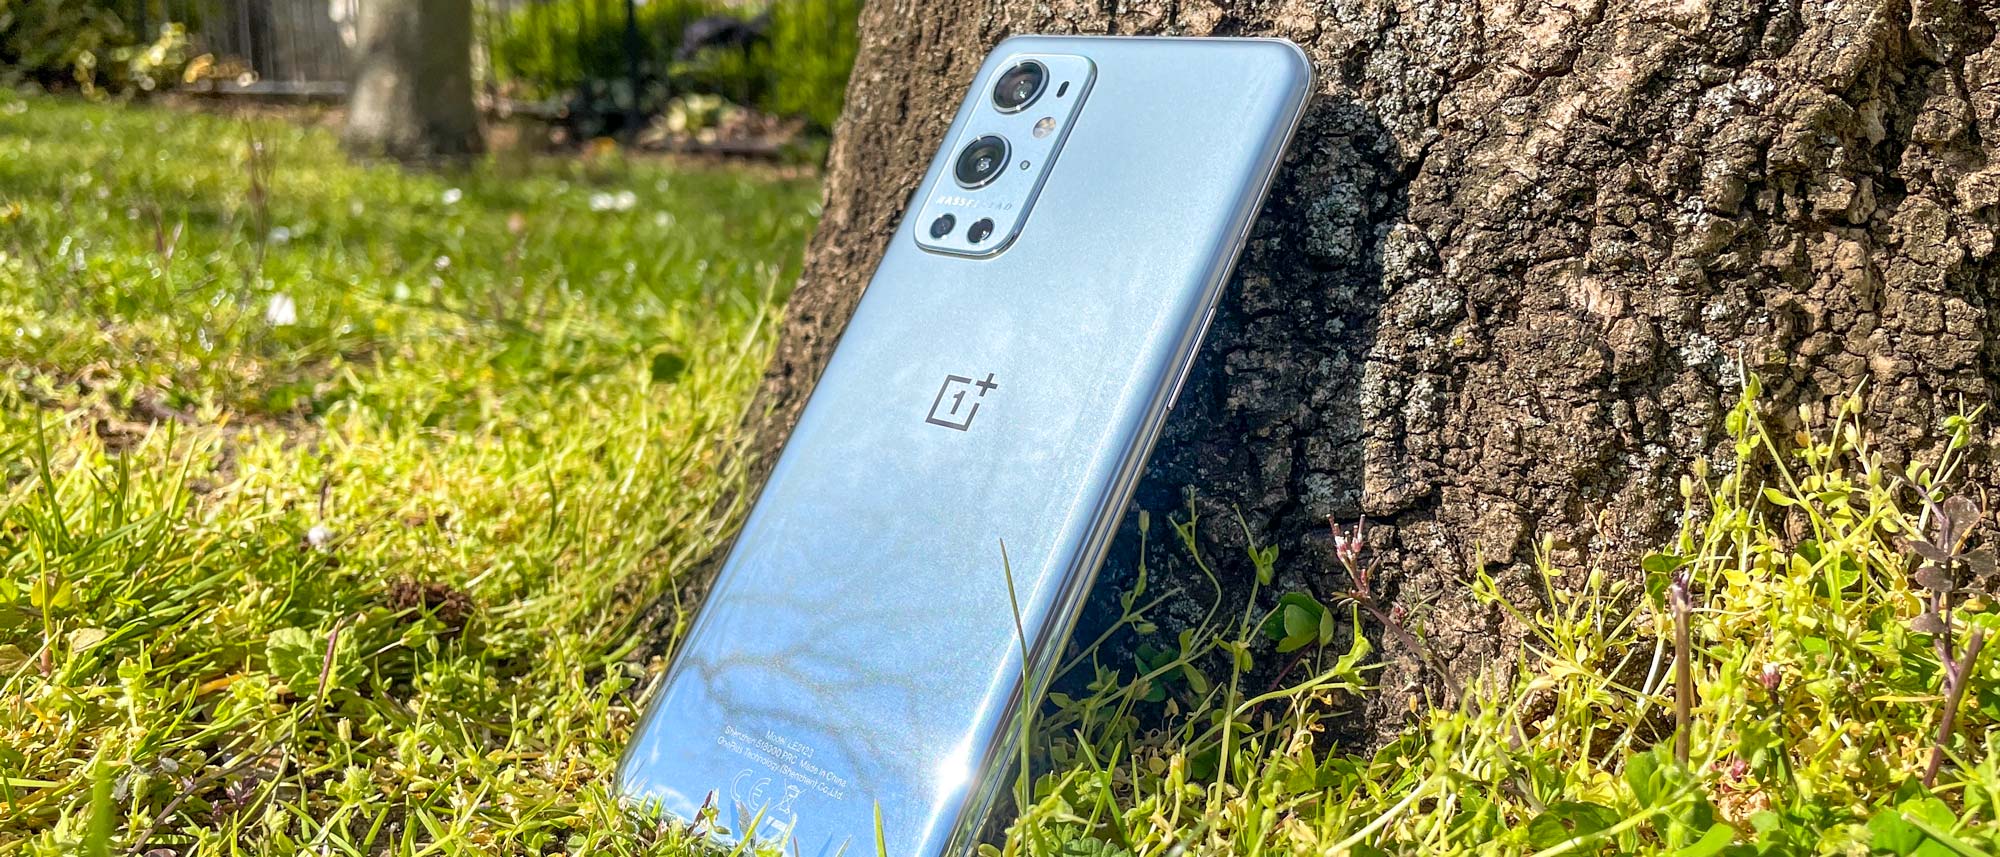 OnePlus 9 Pro Review in 2022 - One Year Later - after update